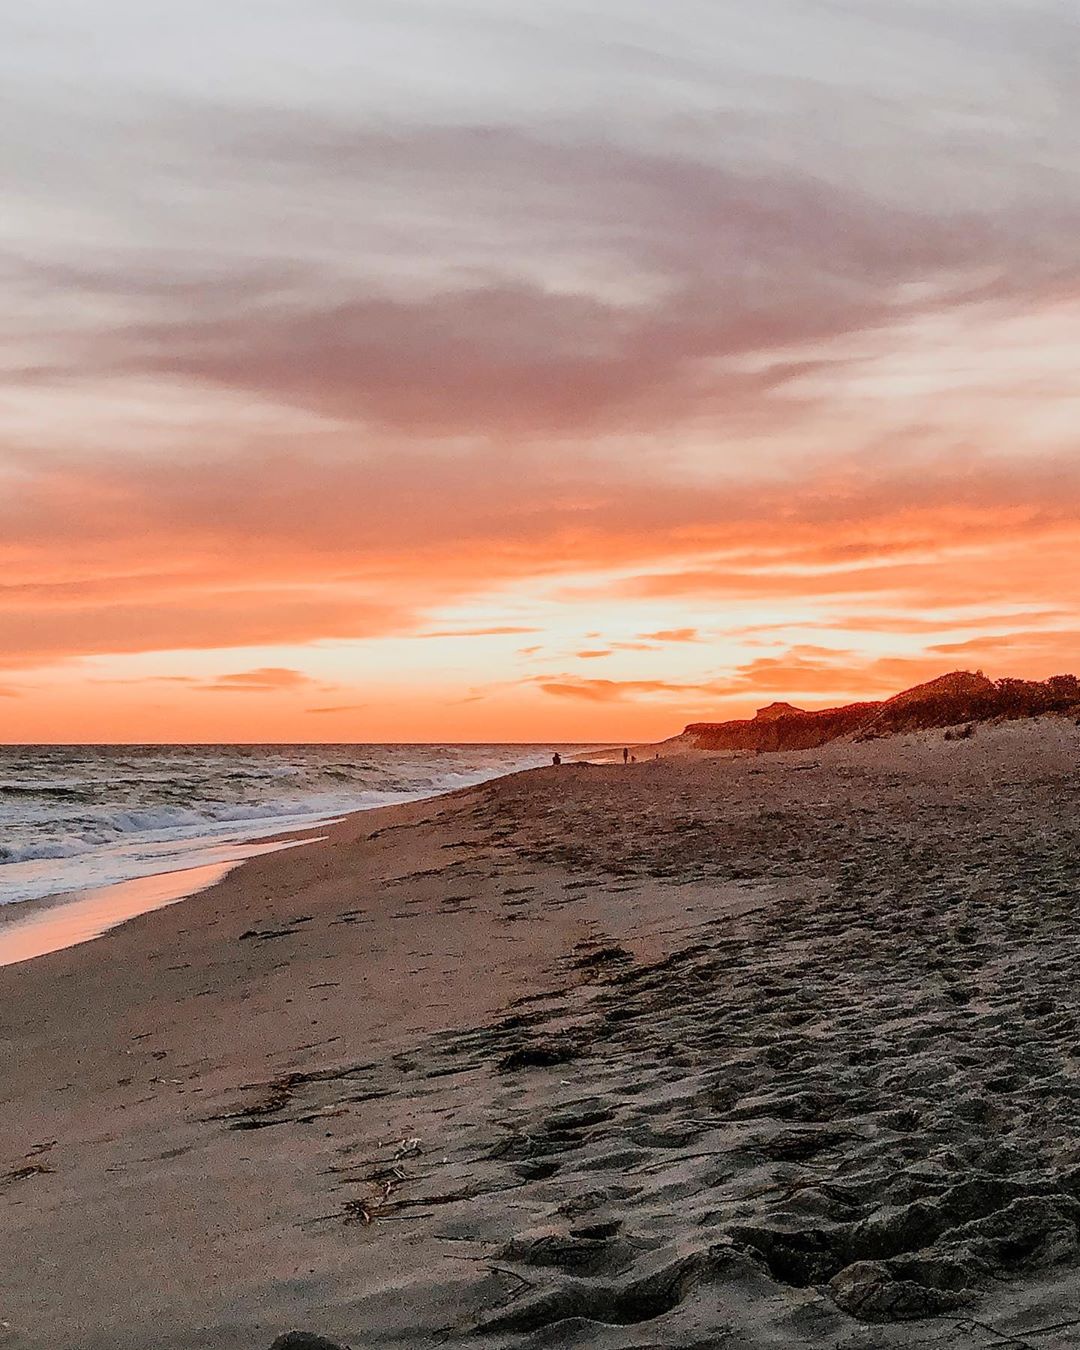 Sandy beach and pink sunset in Nantucket, MA. Photo by Instagram user @jessicajenkinsphotography